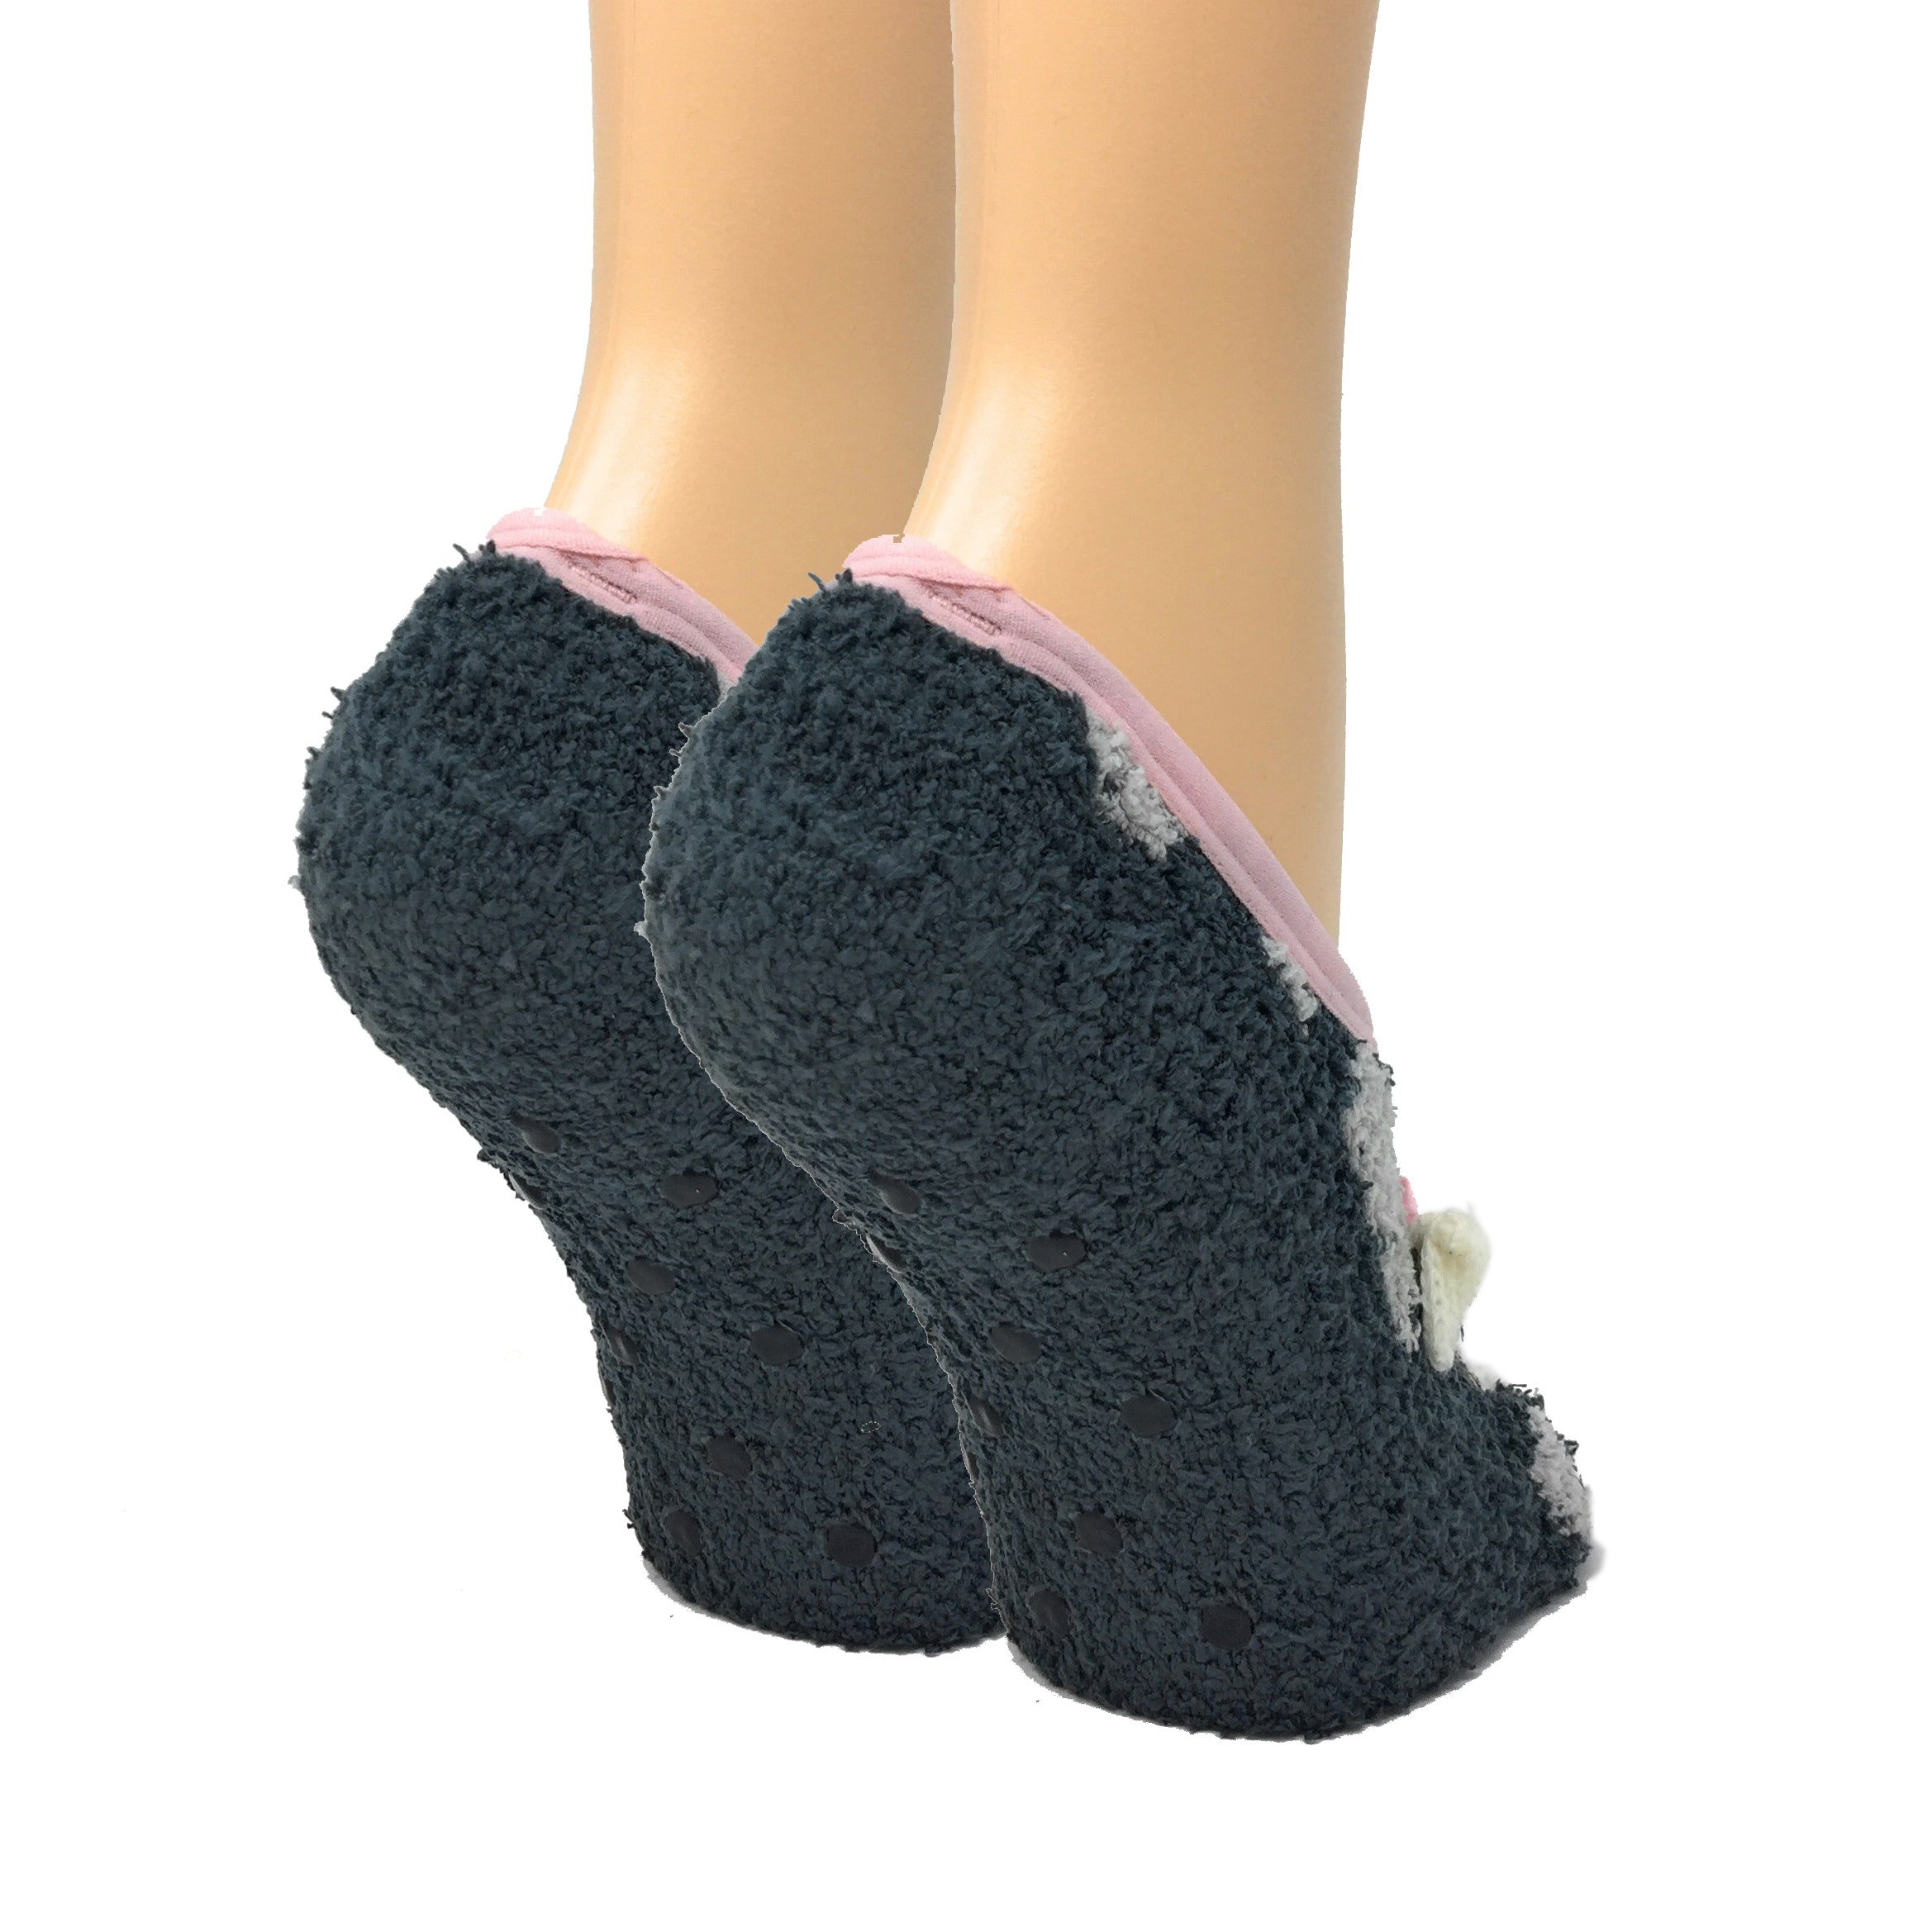 treat your feet to Cozy Cotton Silk. sock slippers and more, oh my